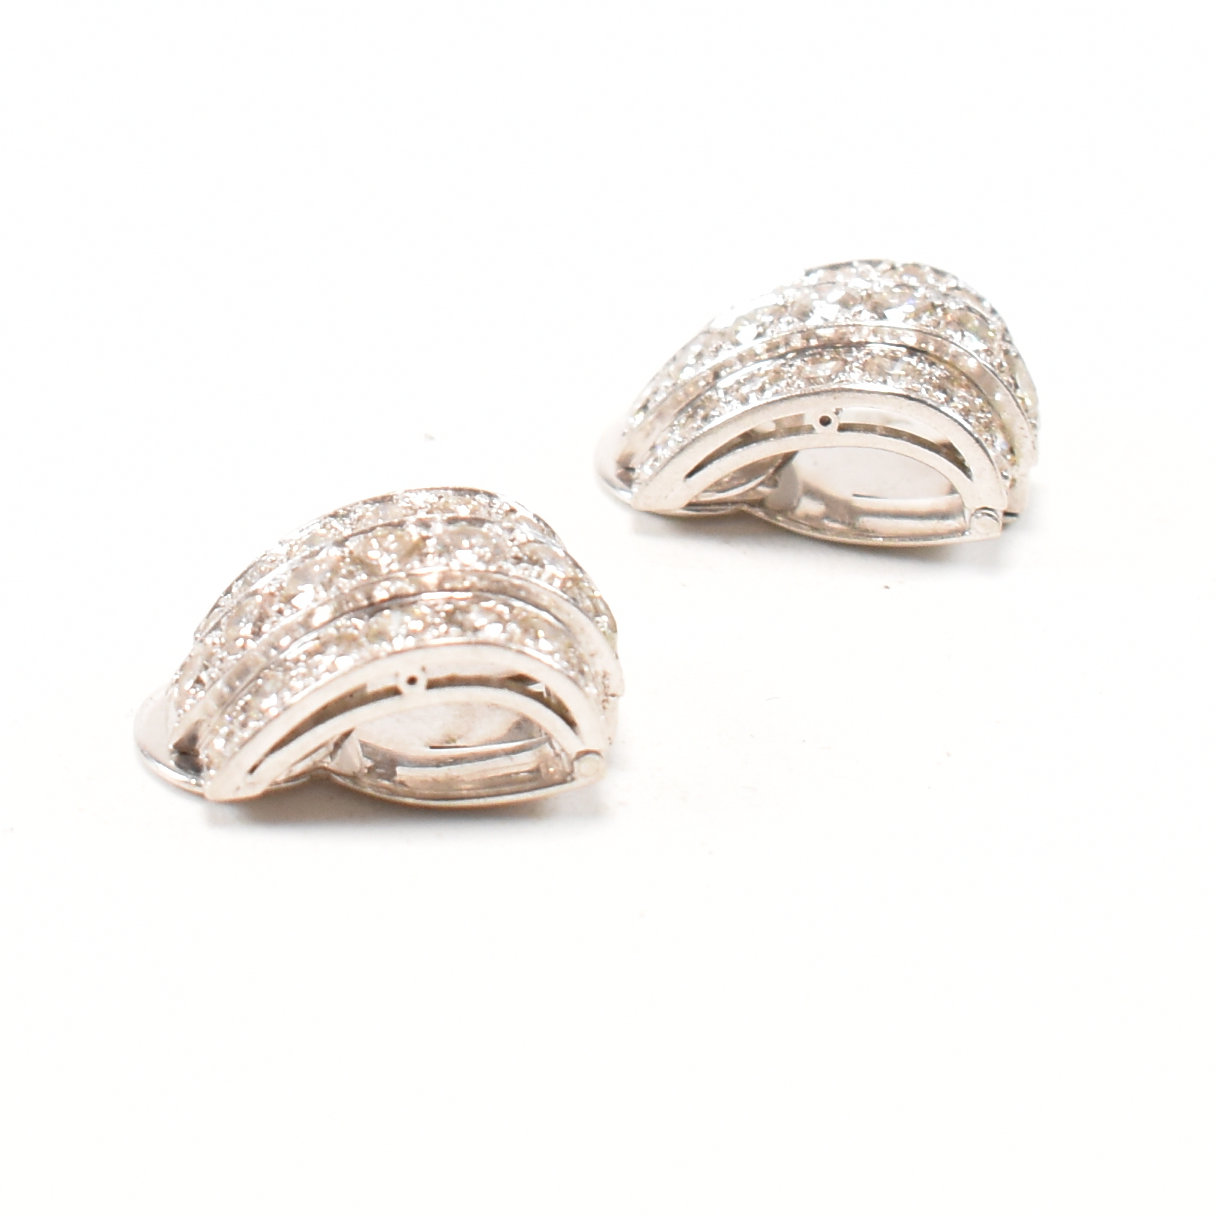 PAIR OF ART DECO 18CT WHITE GOLD & DIAMONDS EAR CLIPS - Image 6 of 8